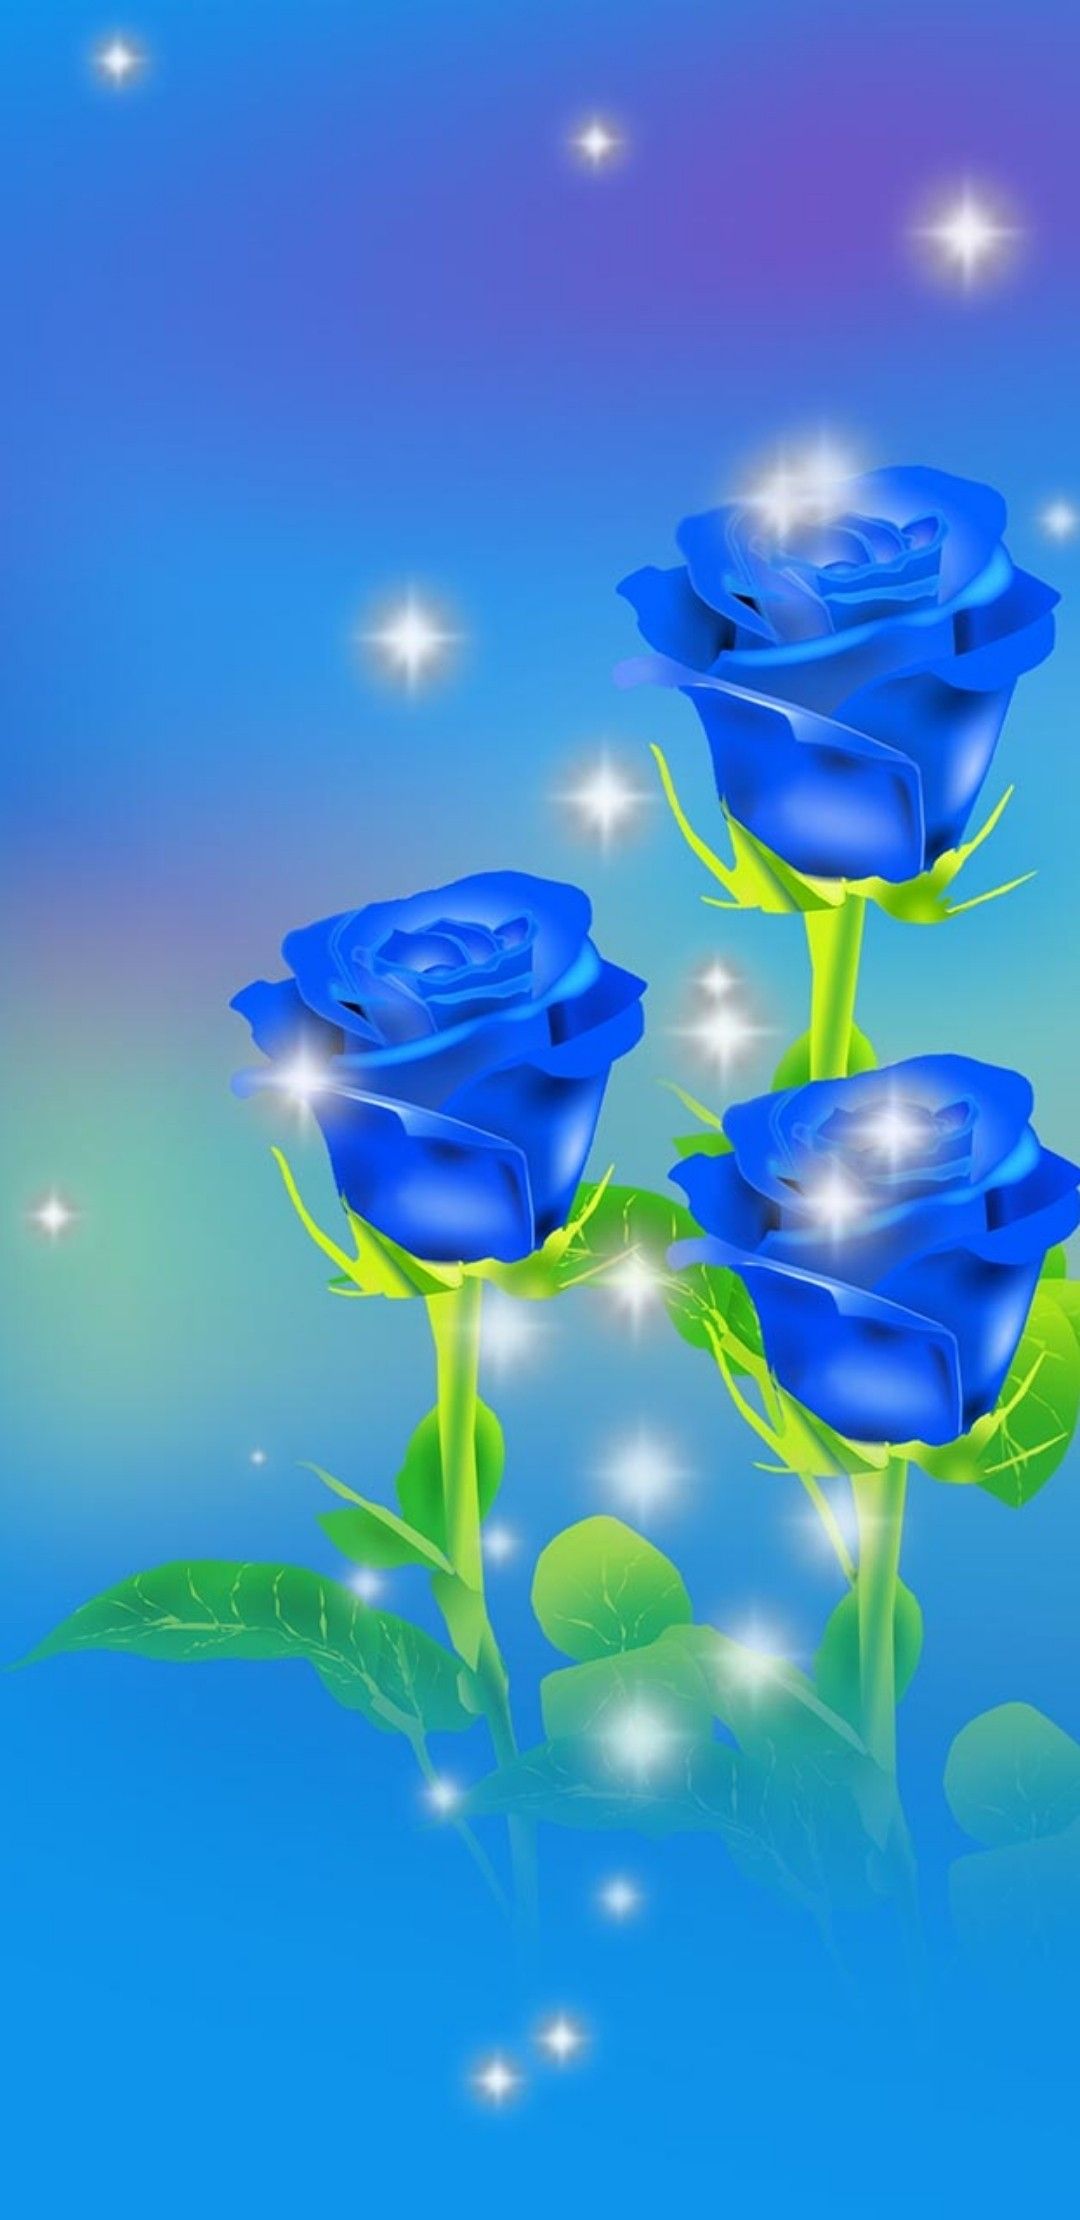 beautiful pictures of roses for wallpaper,blue,blue rose,water,flower,rose